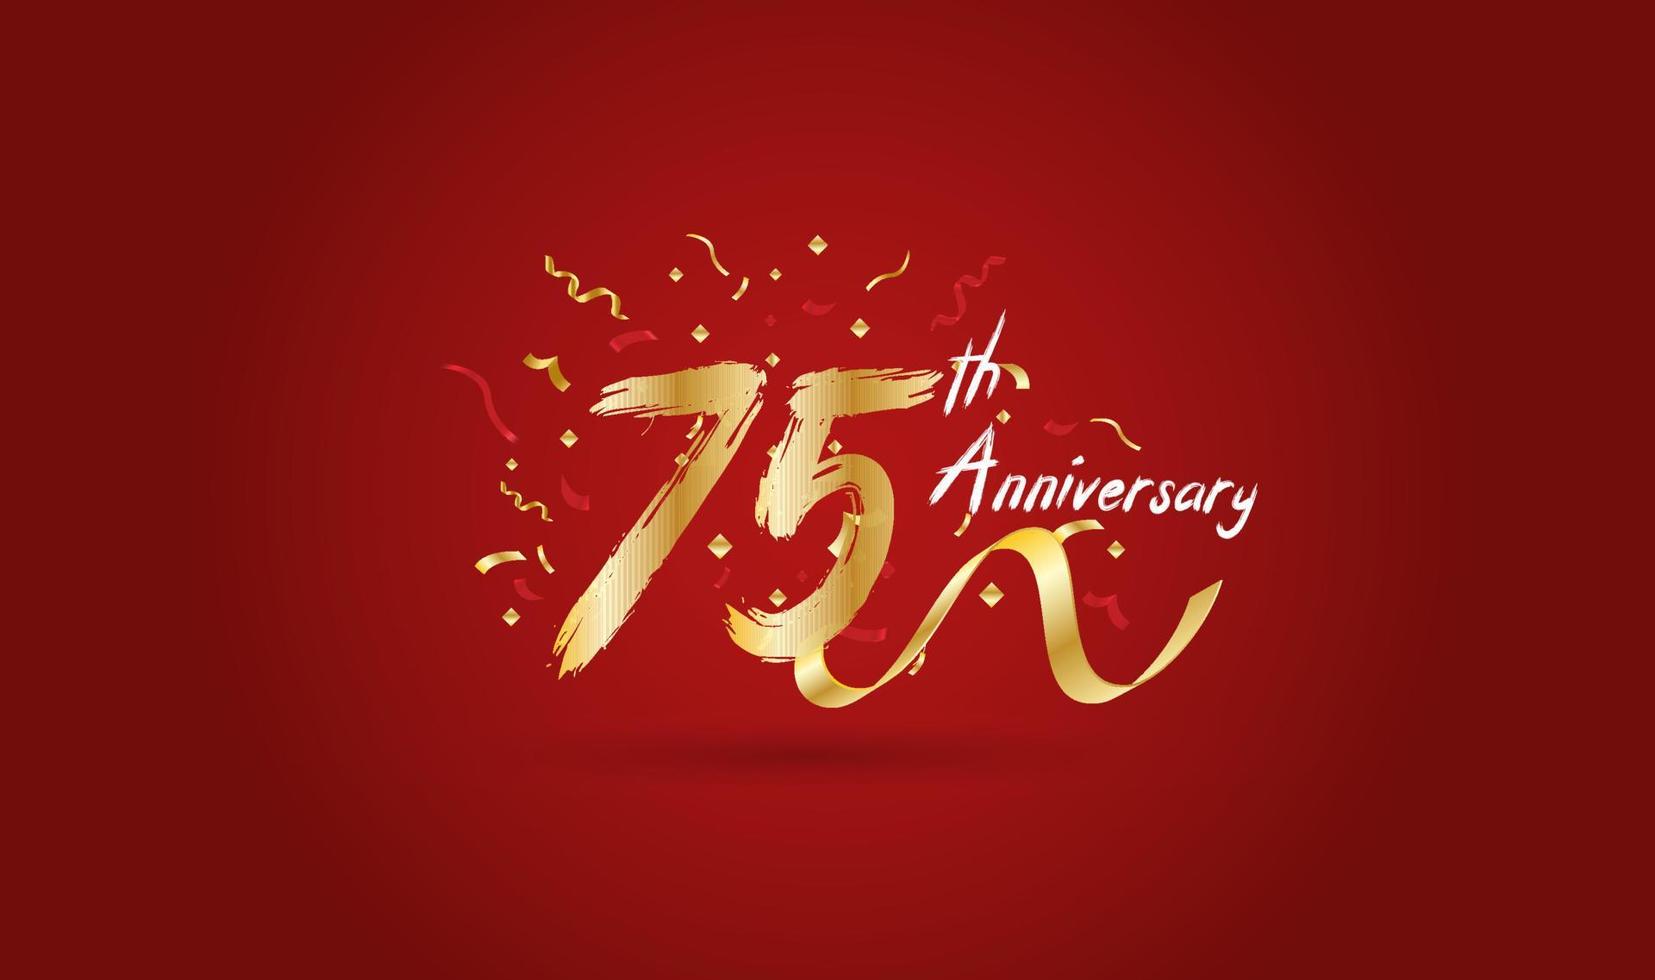 Anniversary celebration with the 75th number in gold and with the words golden anniversary celebration. vector